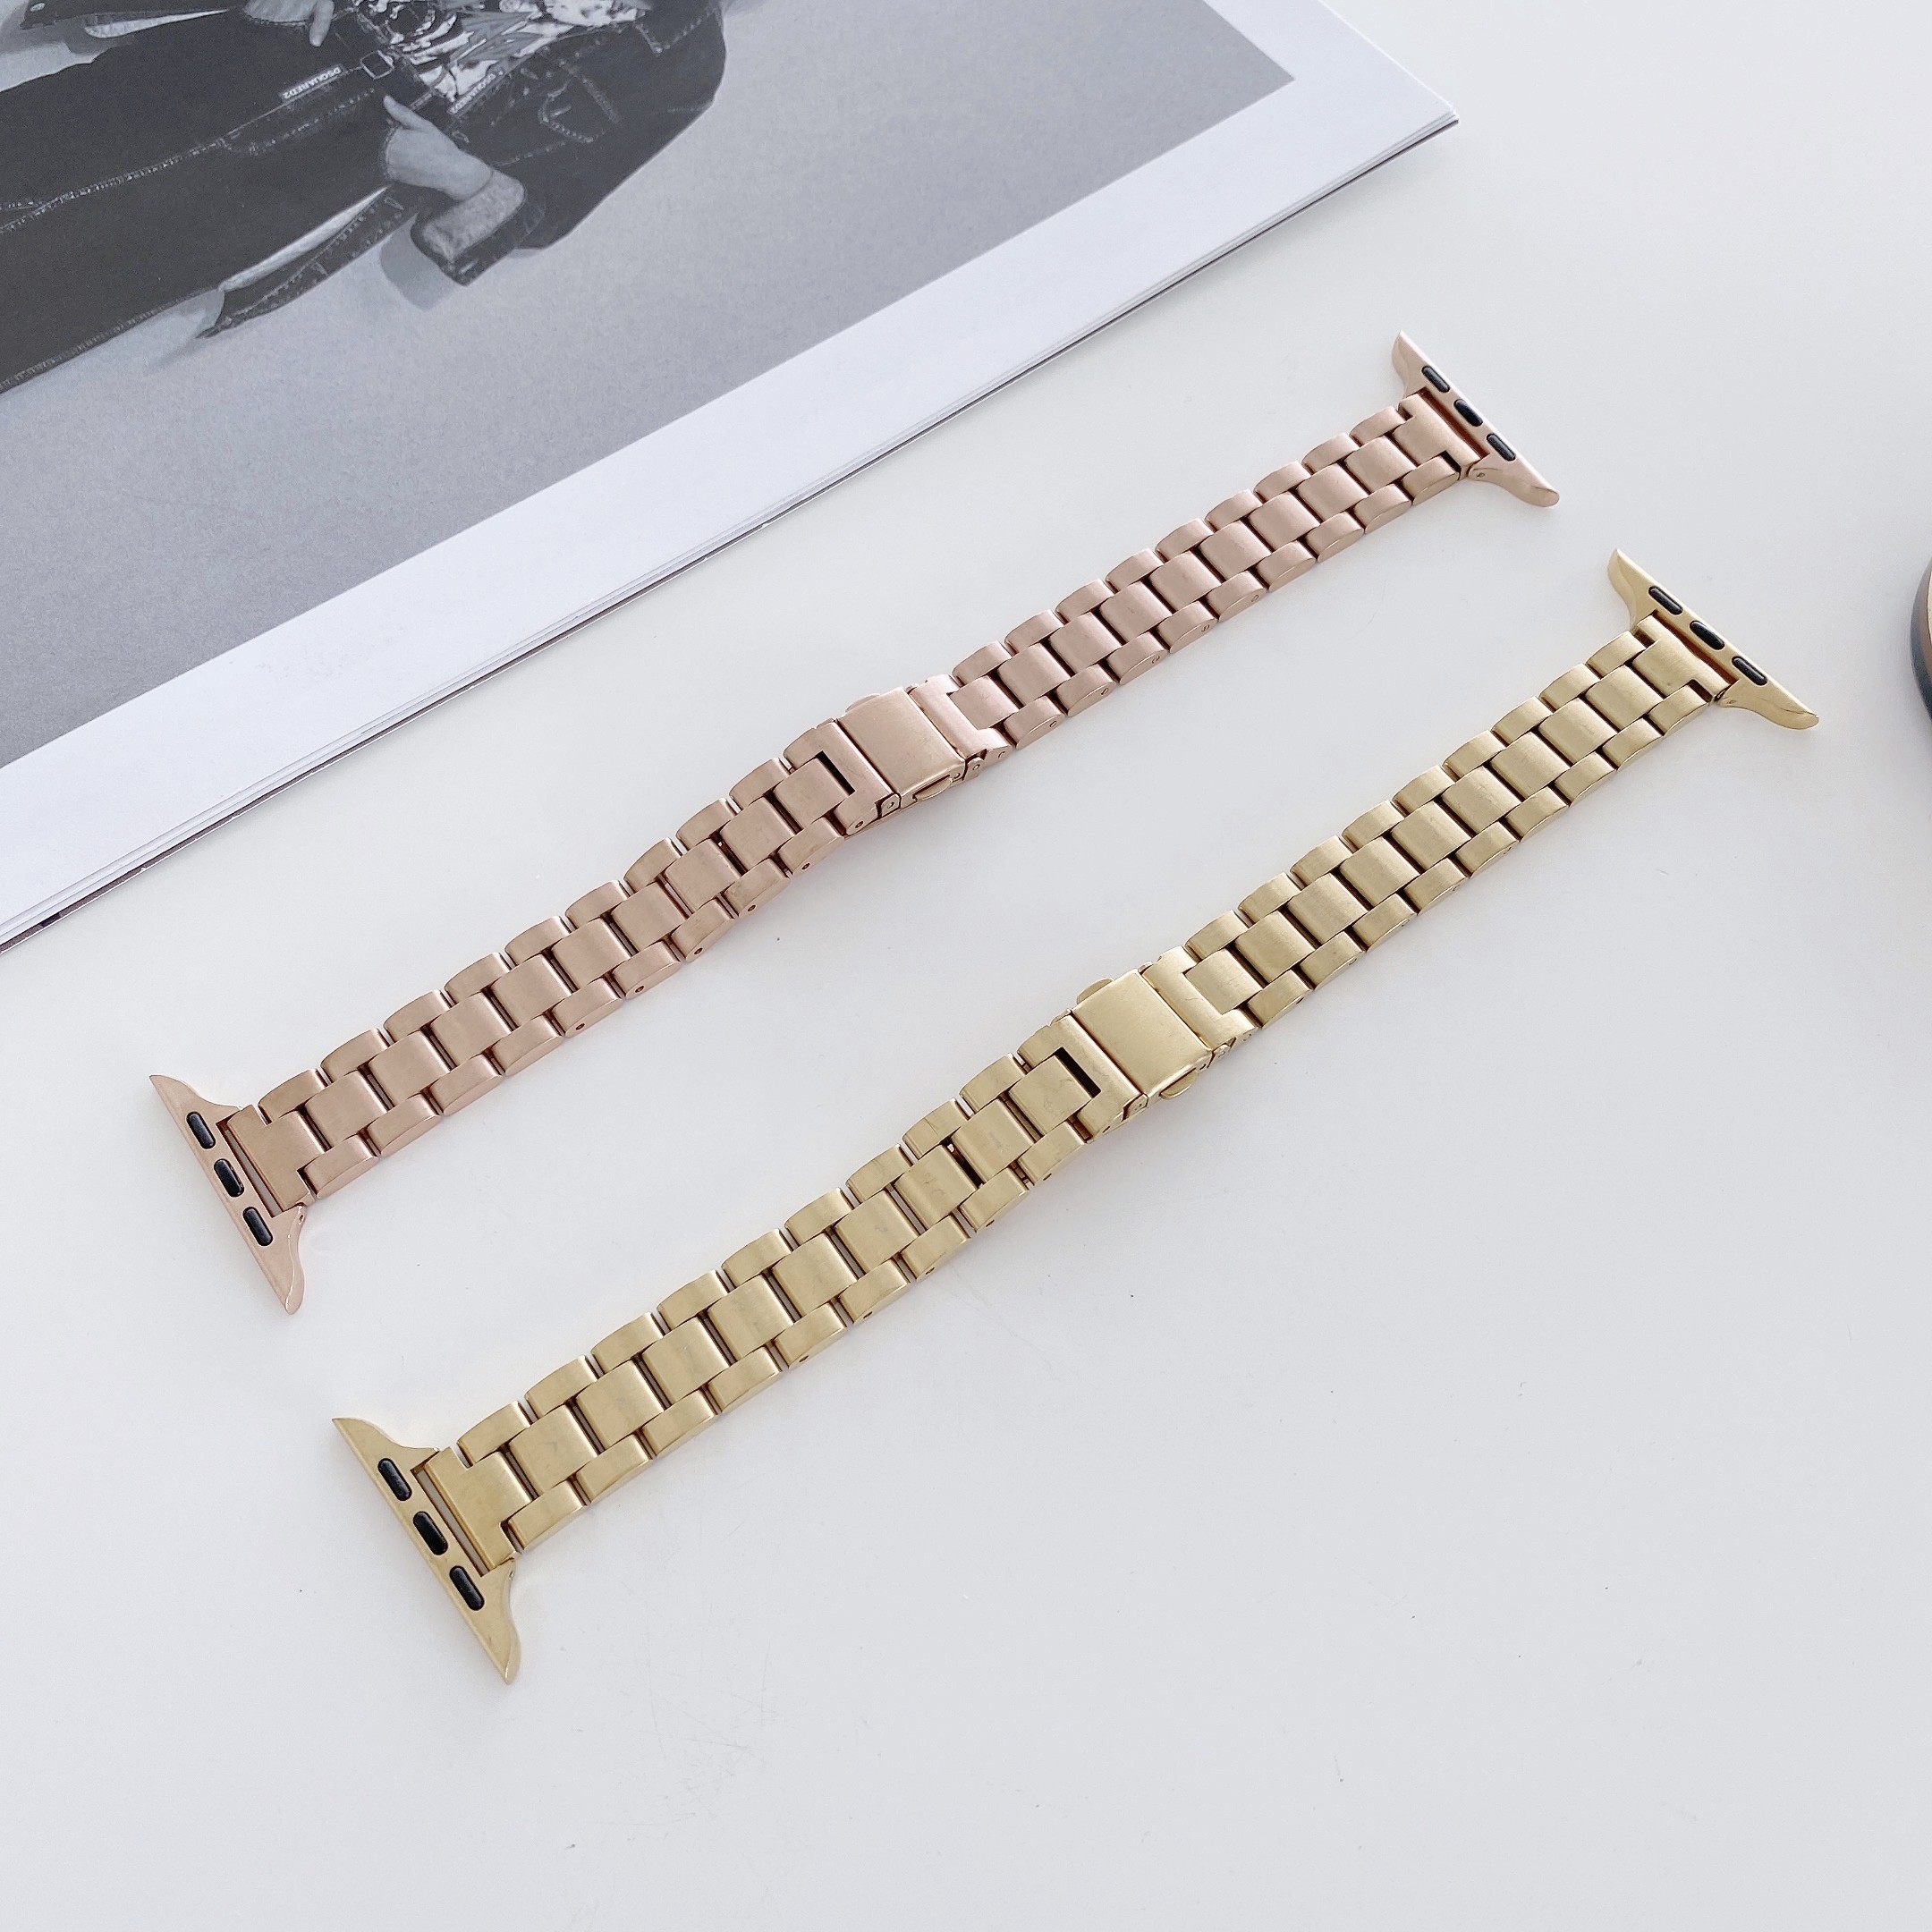 Fashion Luxury Band for Apple Watch Series 6 5 4 3 2 1 Se Stainless Steel Watch Bands for iWatch 38 40 42mm 44mm Strap Bracelet